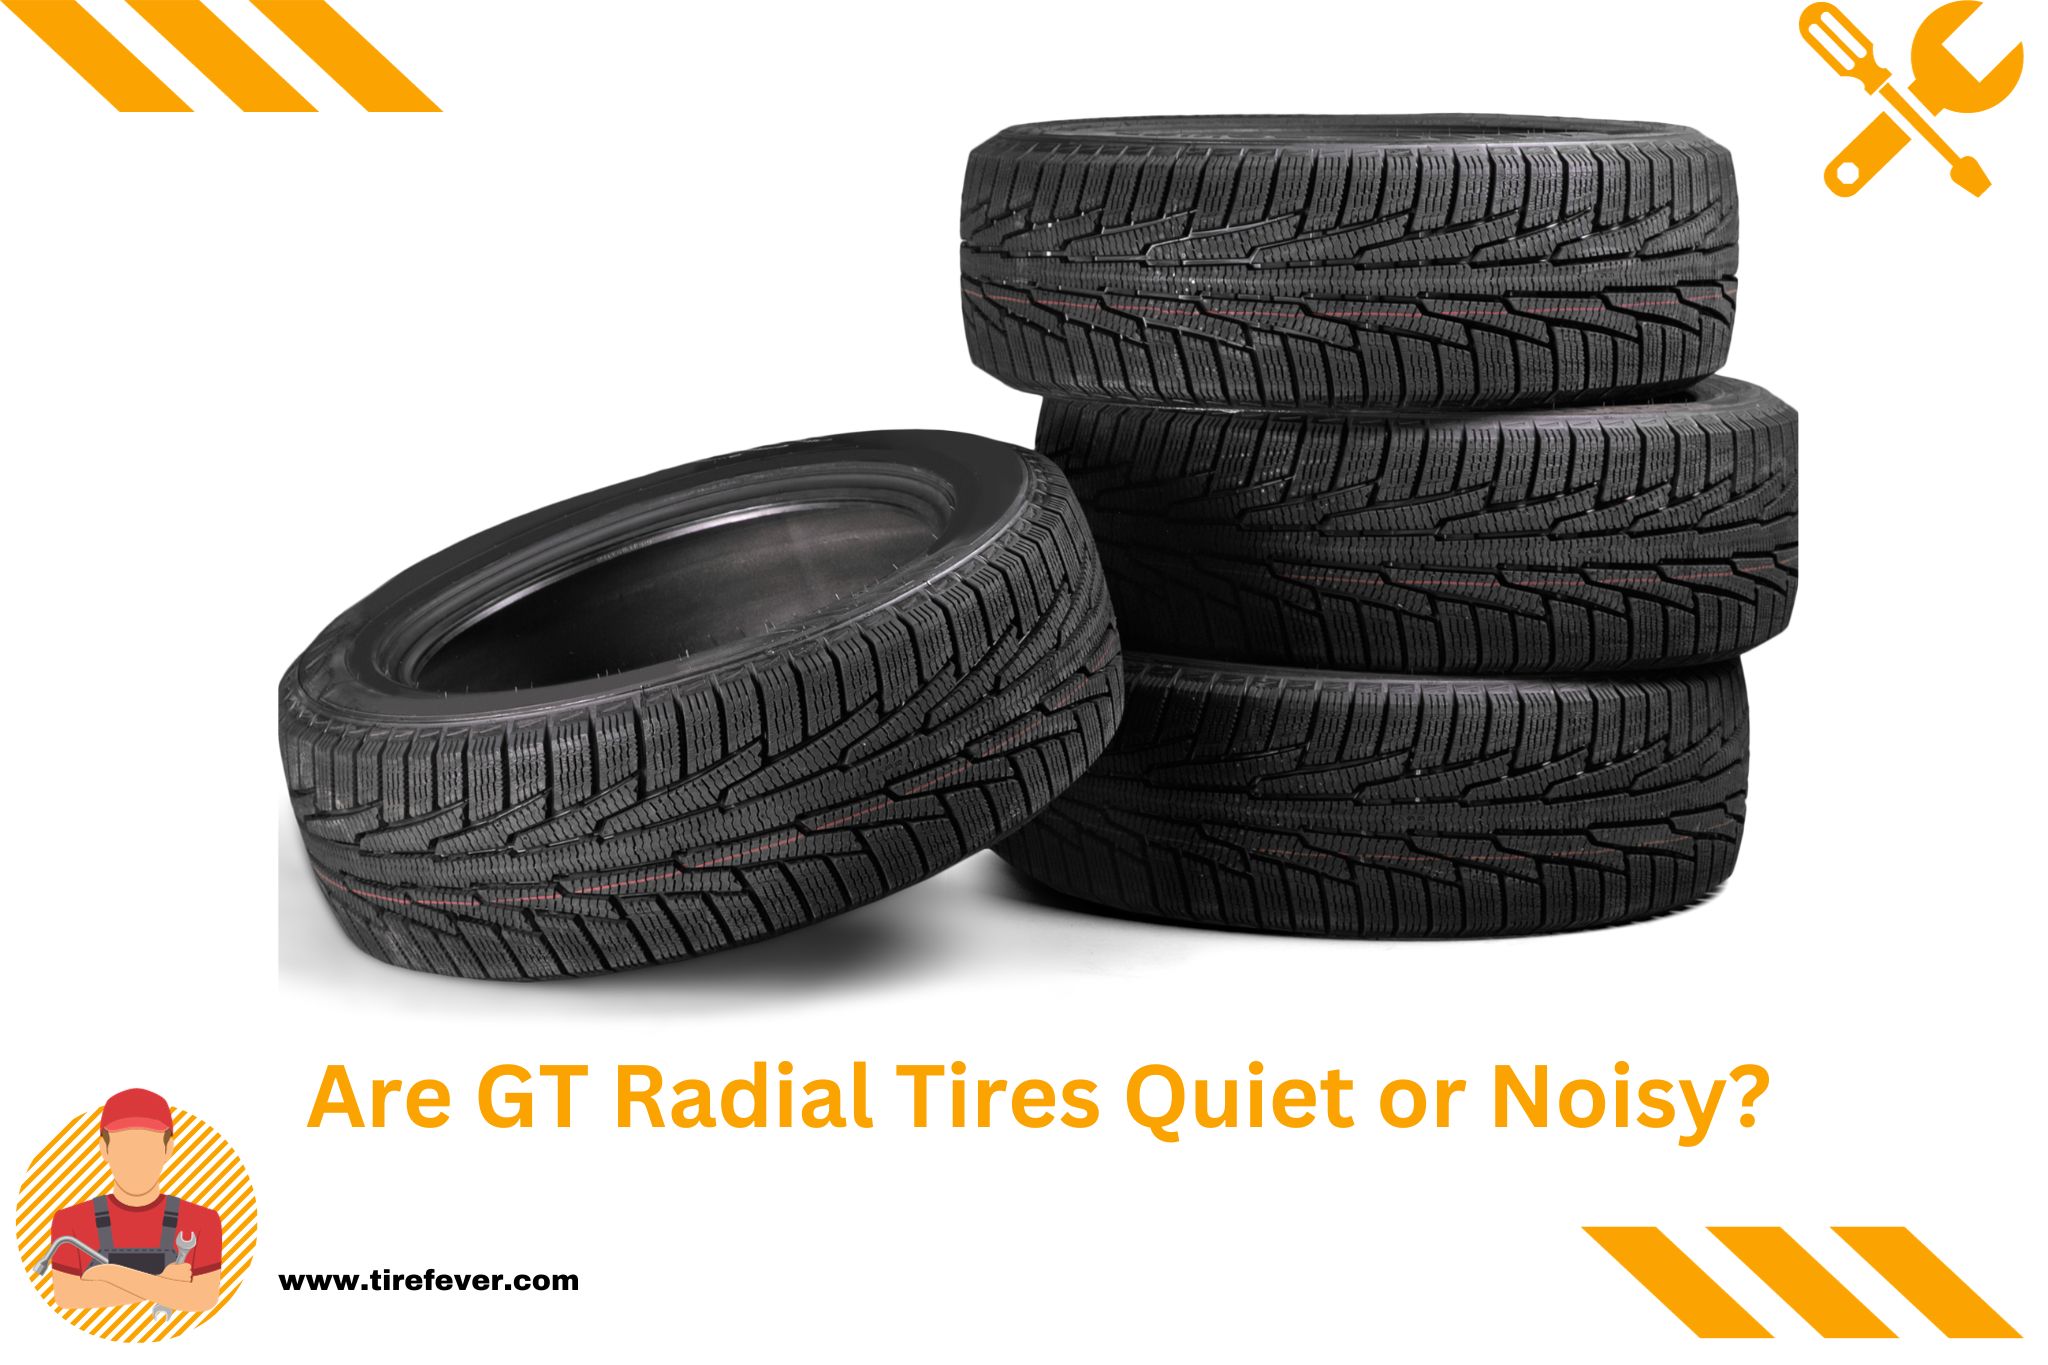 Are GT Radial Tires Quiet or Noisy?